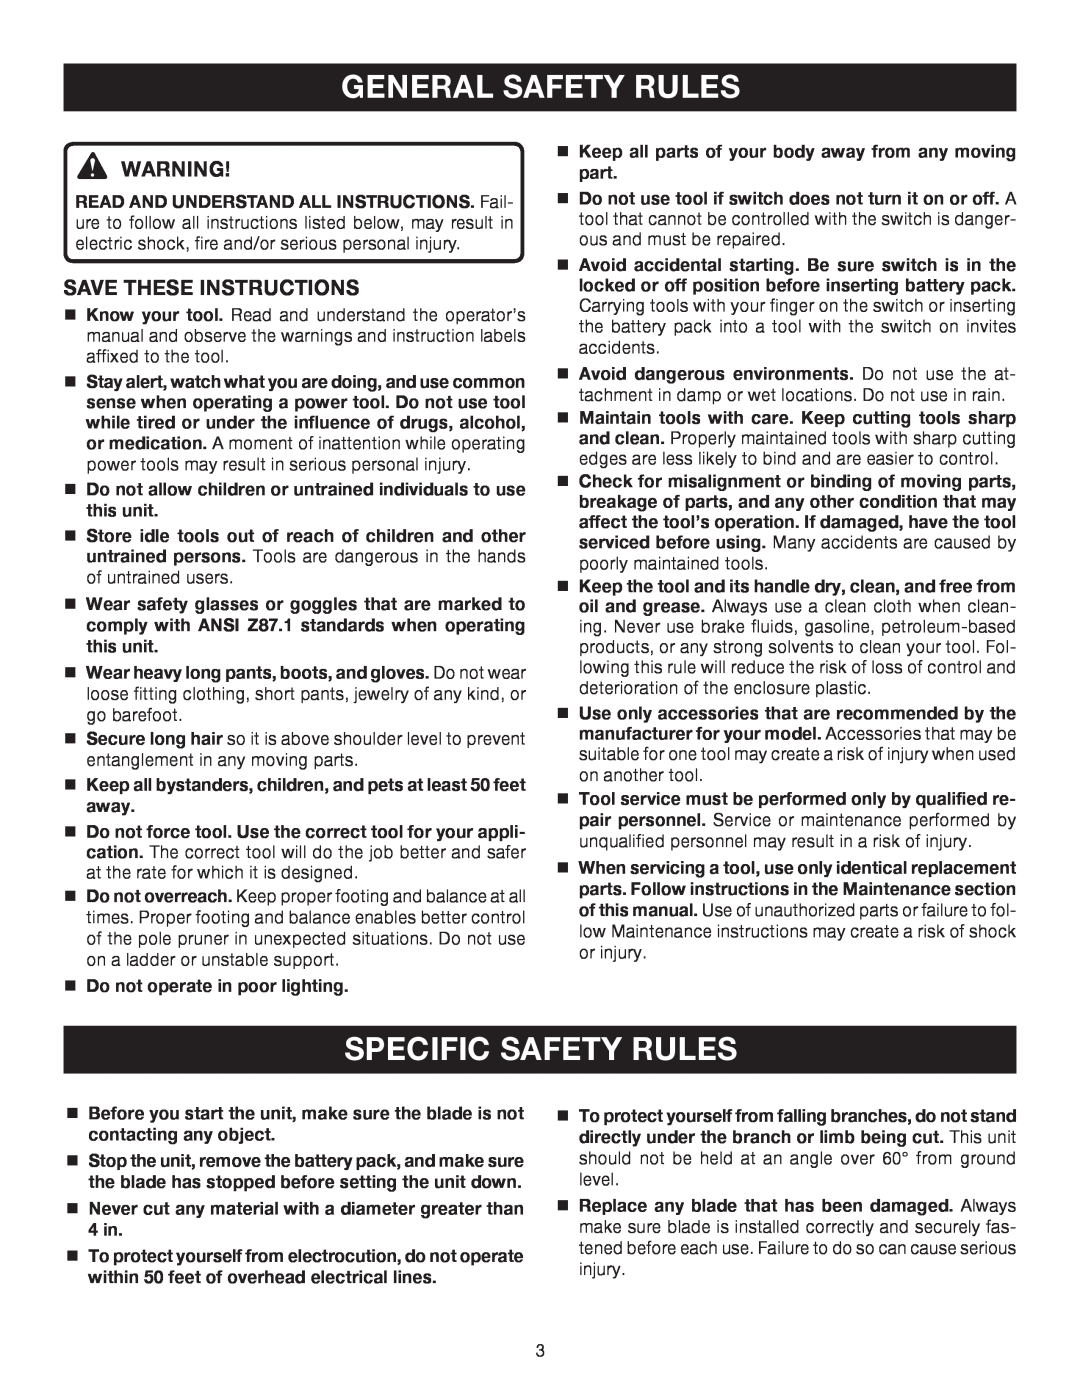 Ryobi P2500 manual General Safety Rules, Specific Safety Rules, Save These Instructions 